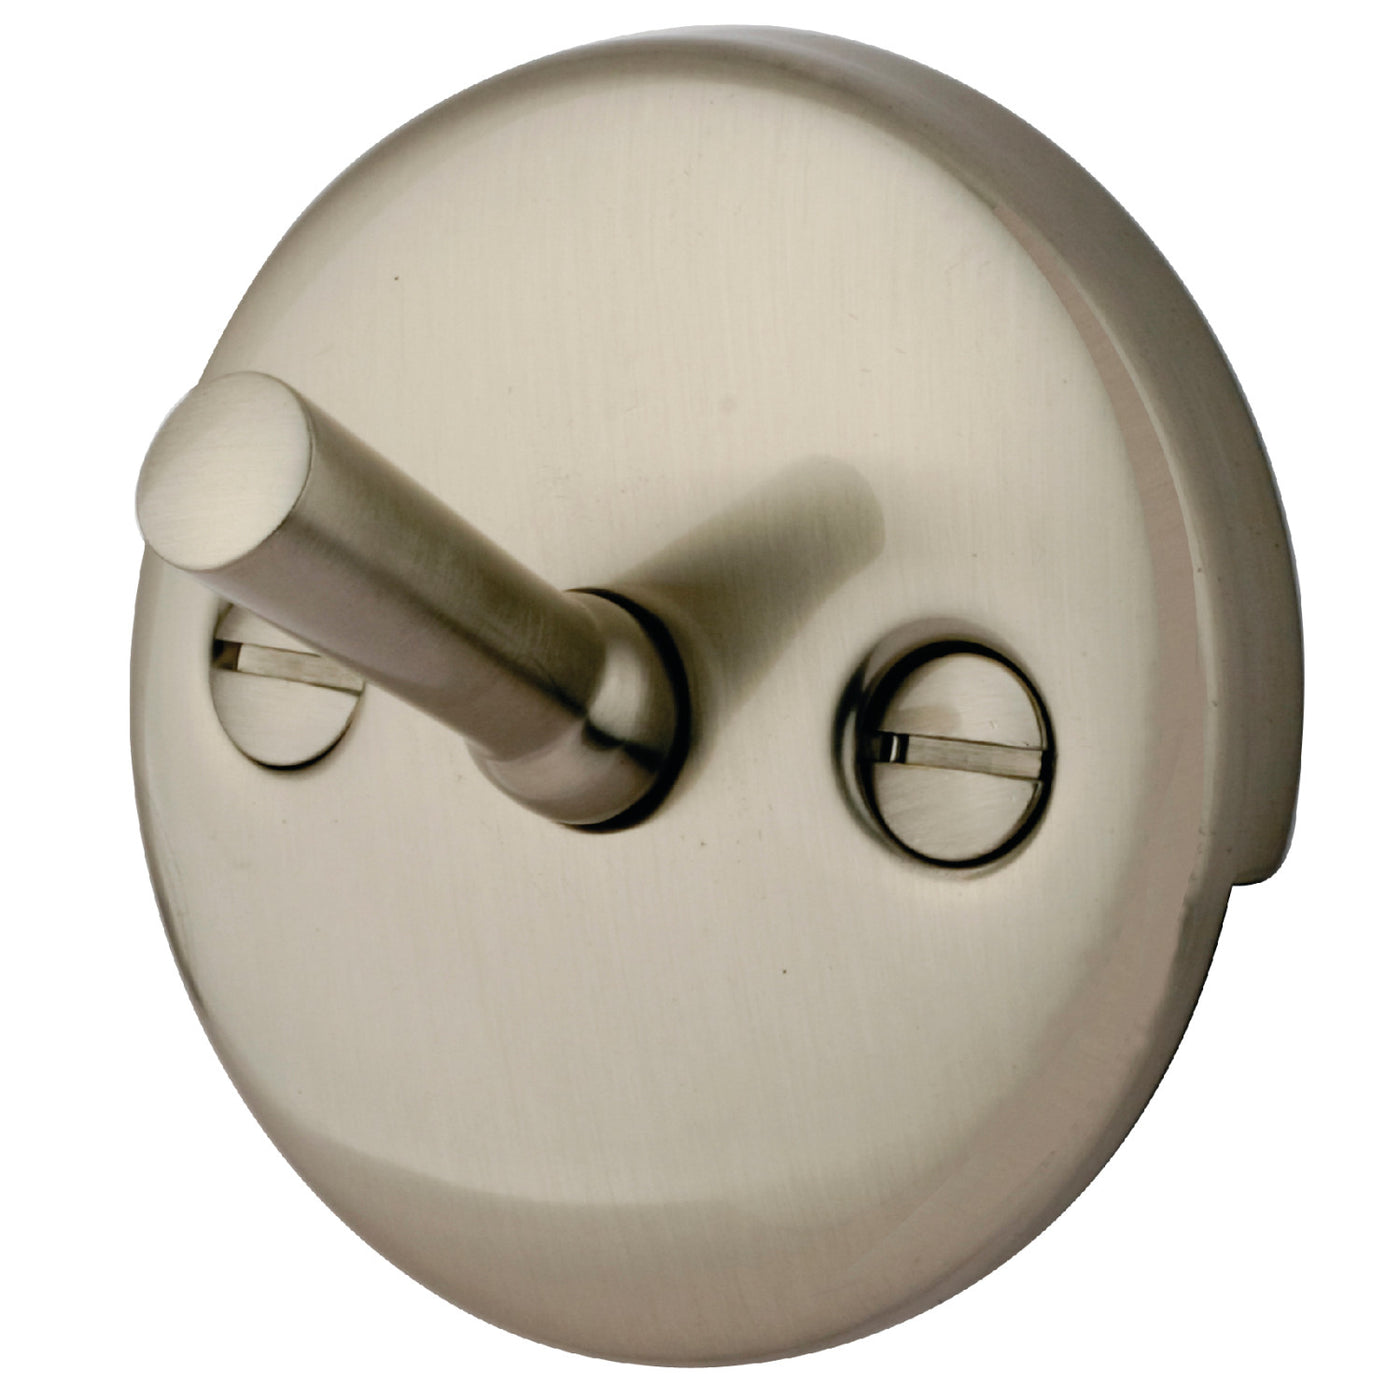 Elements of Design EDTL108 Round Overflow Plate with Trip Lever, Brushed Nickel